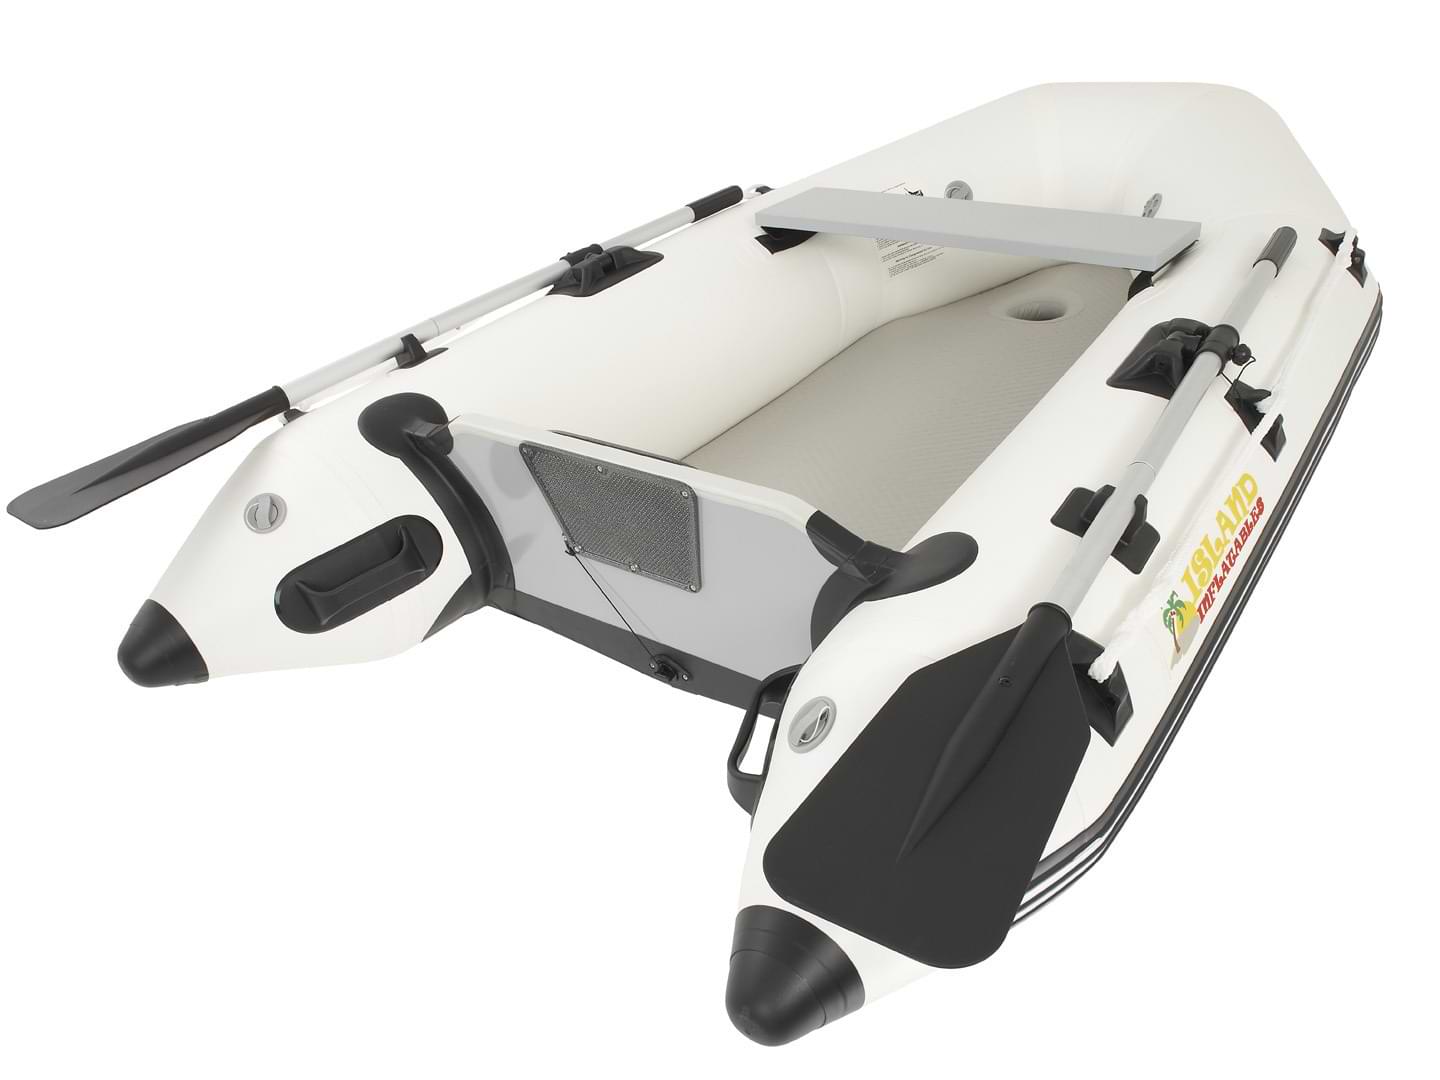 Test Your Nautical Knowledge & Get to Know Your New Inflatable Boat